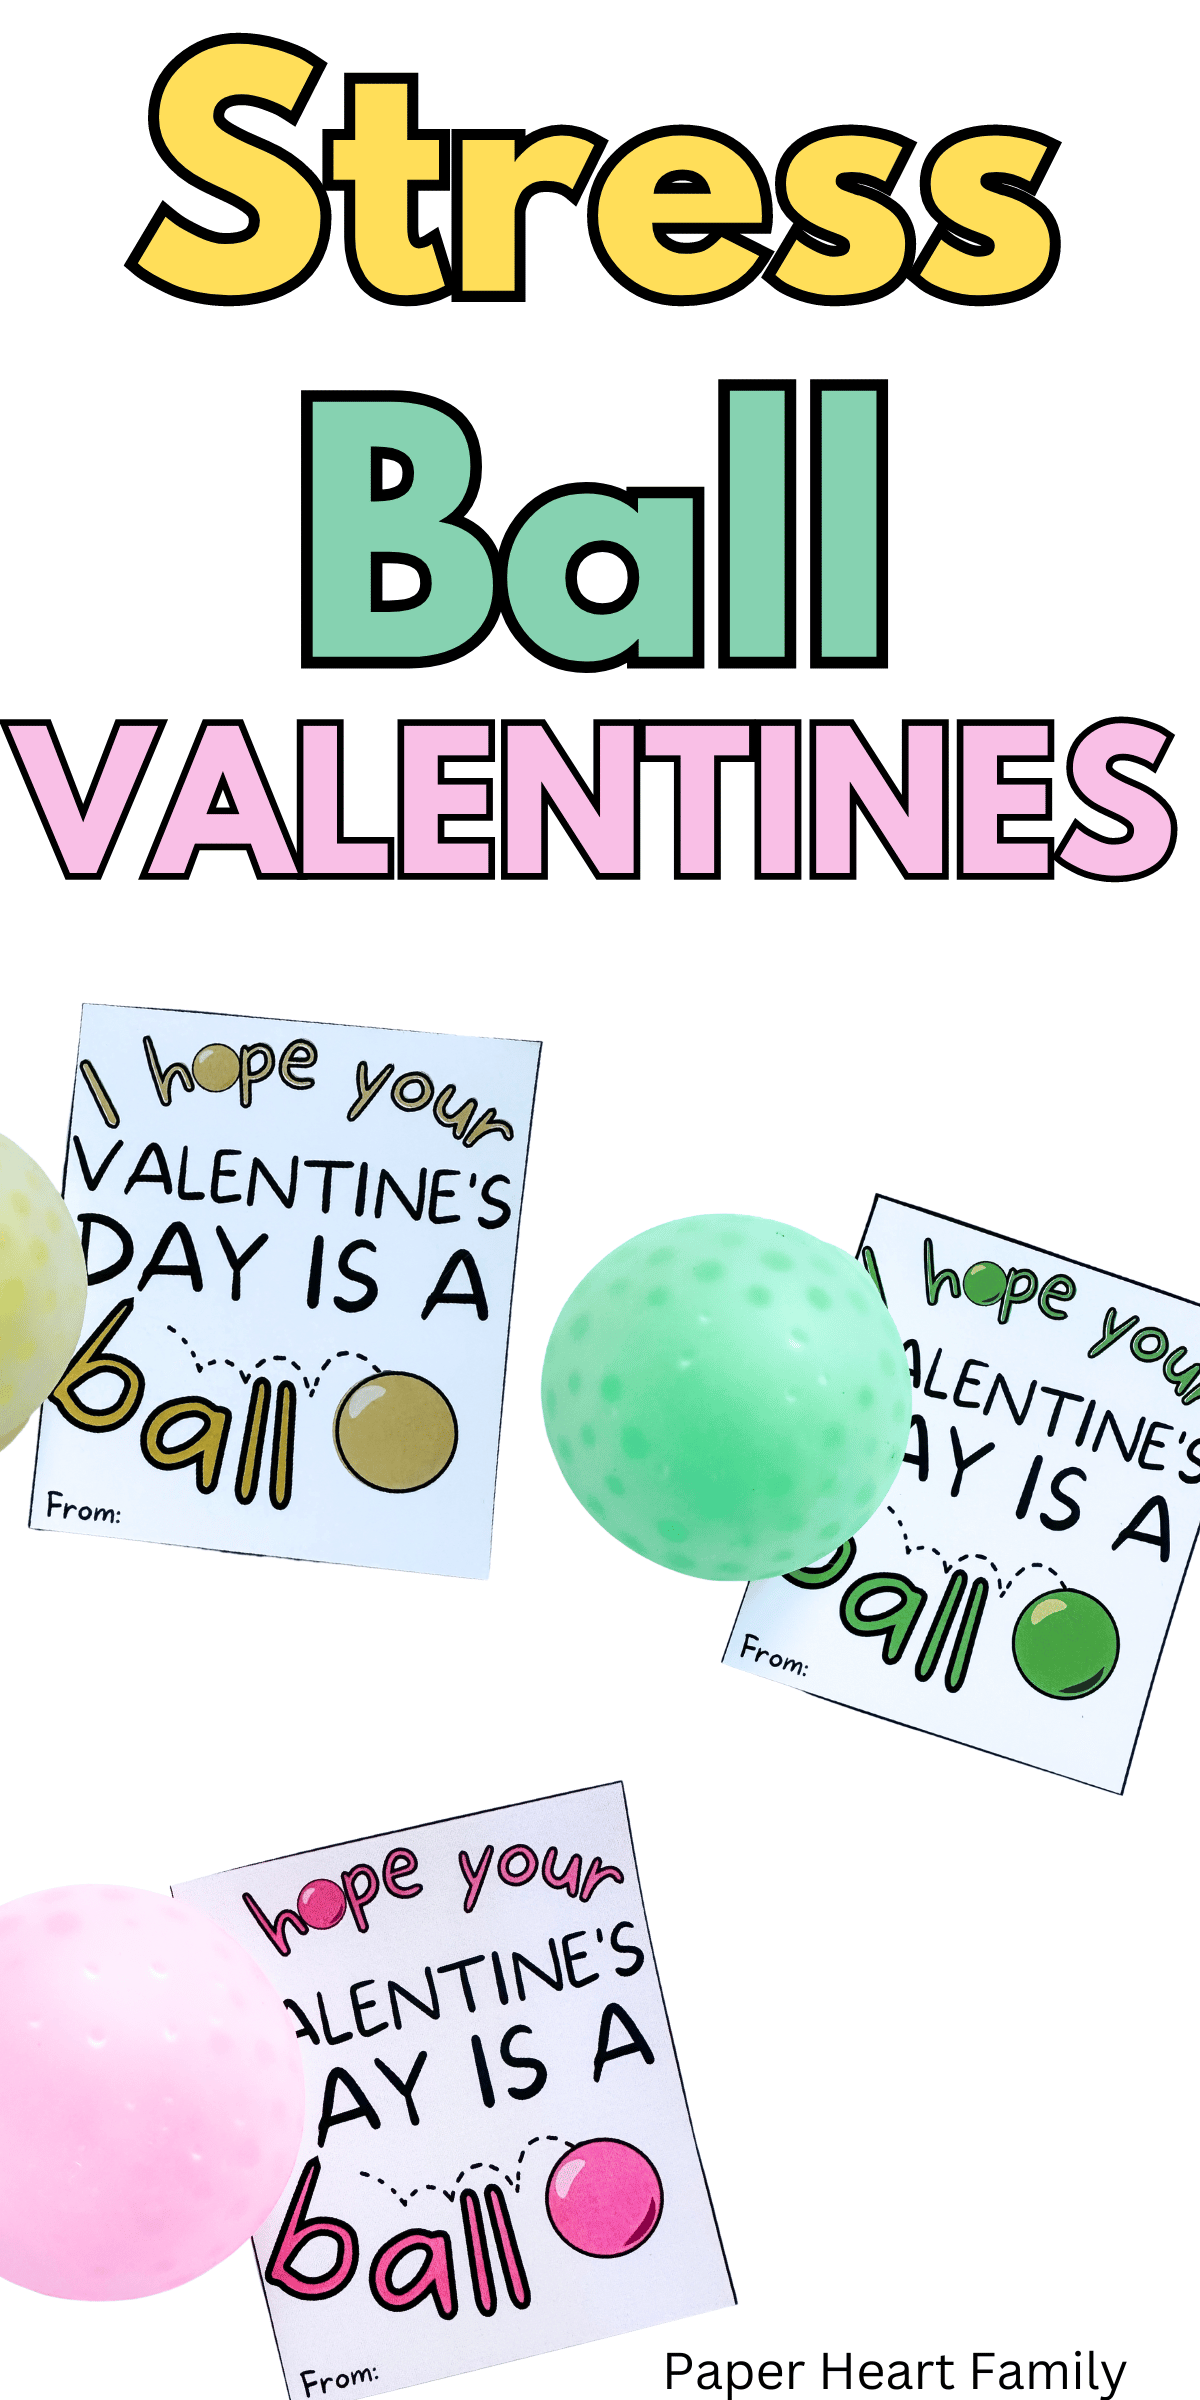 Valentine card says "I hope your Valentine's Day is a ball" with a stress ball attached